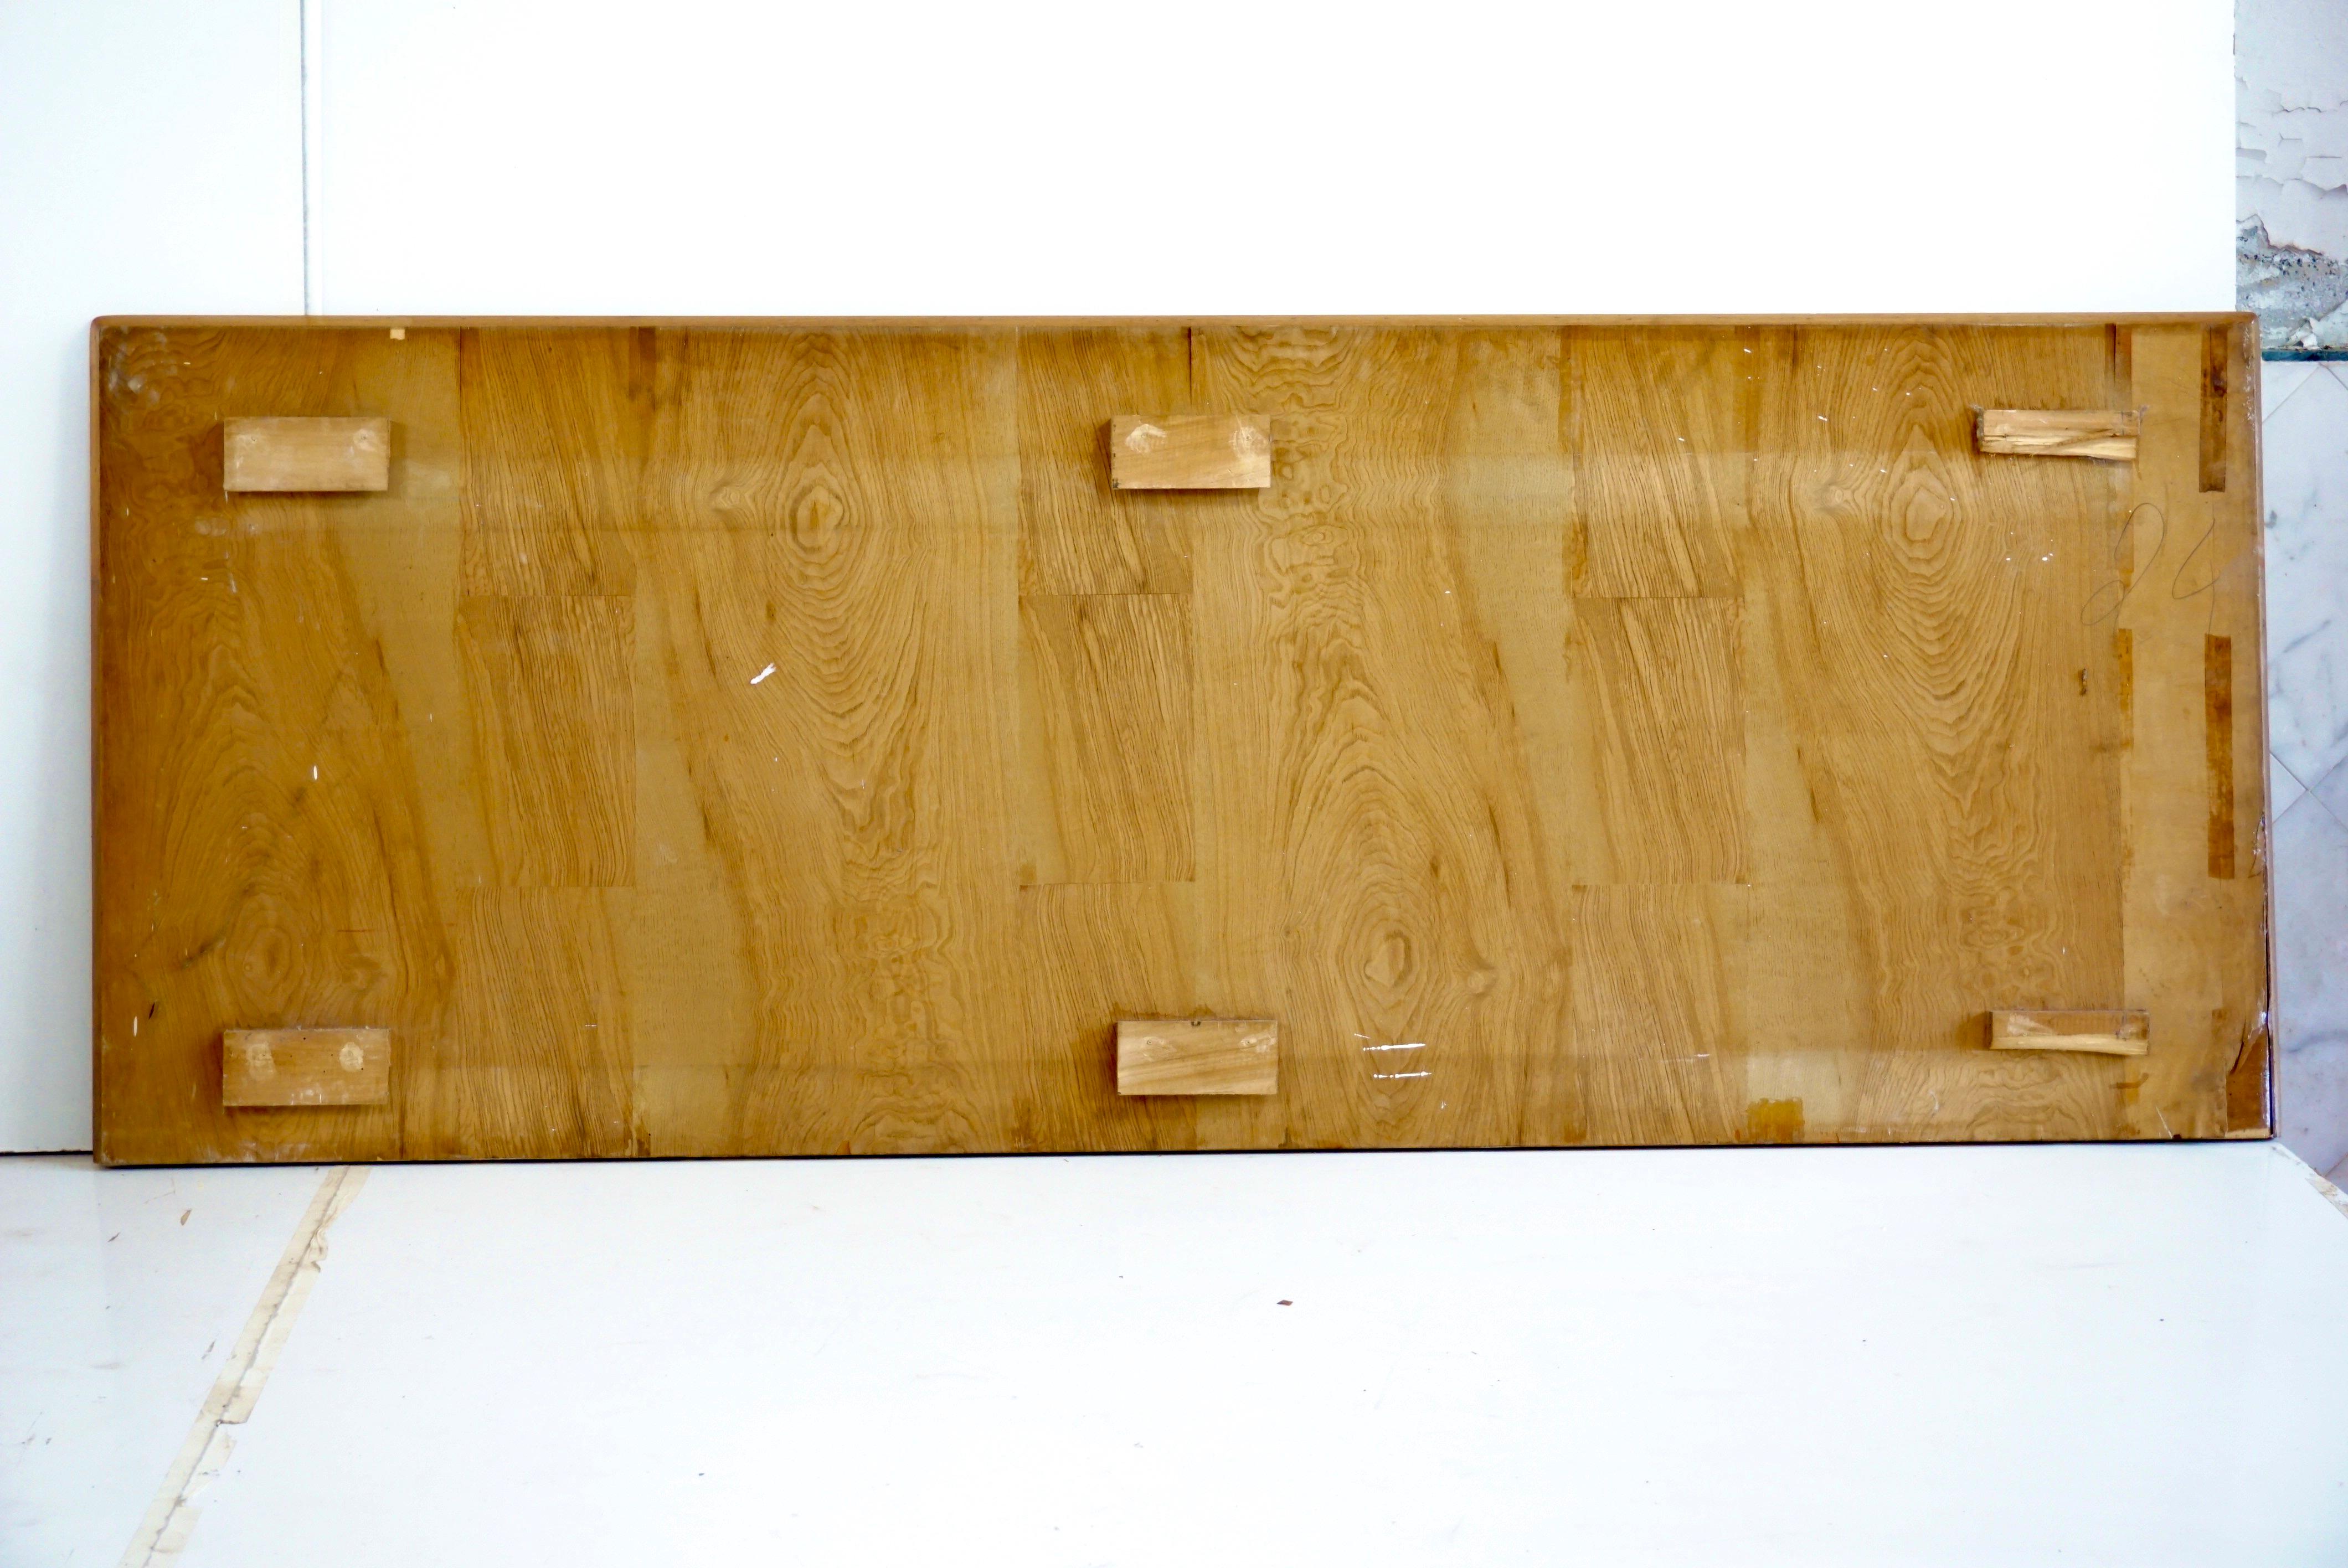 Pair of Large Gio Ponti Cherrywood Boiserie Panels from Hotel Royal, Naples 1955 For Sale 4